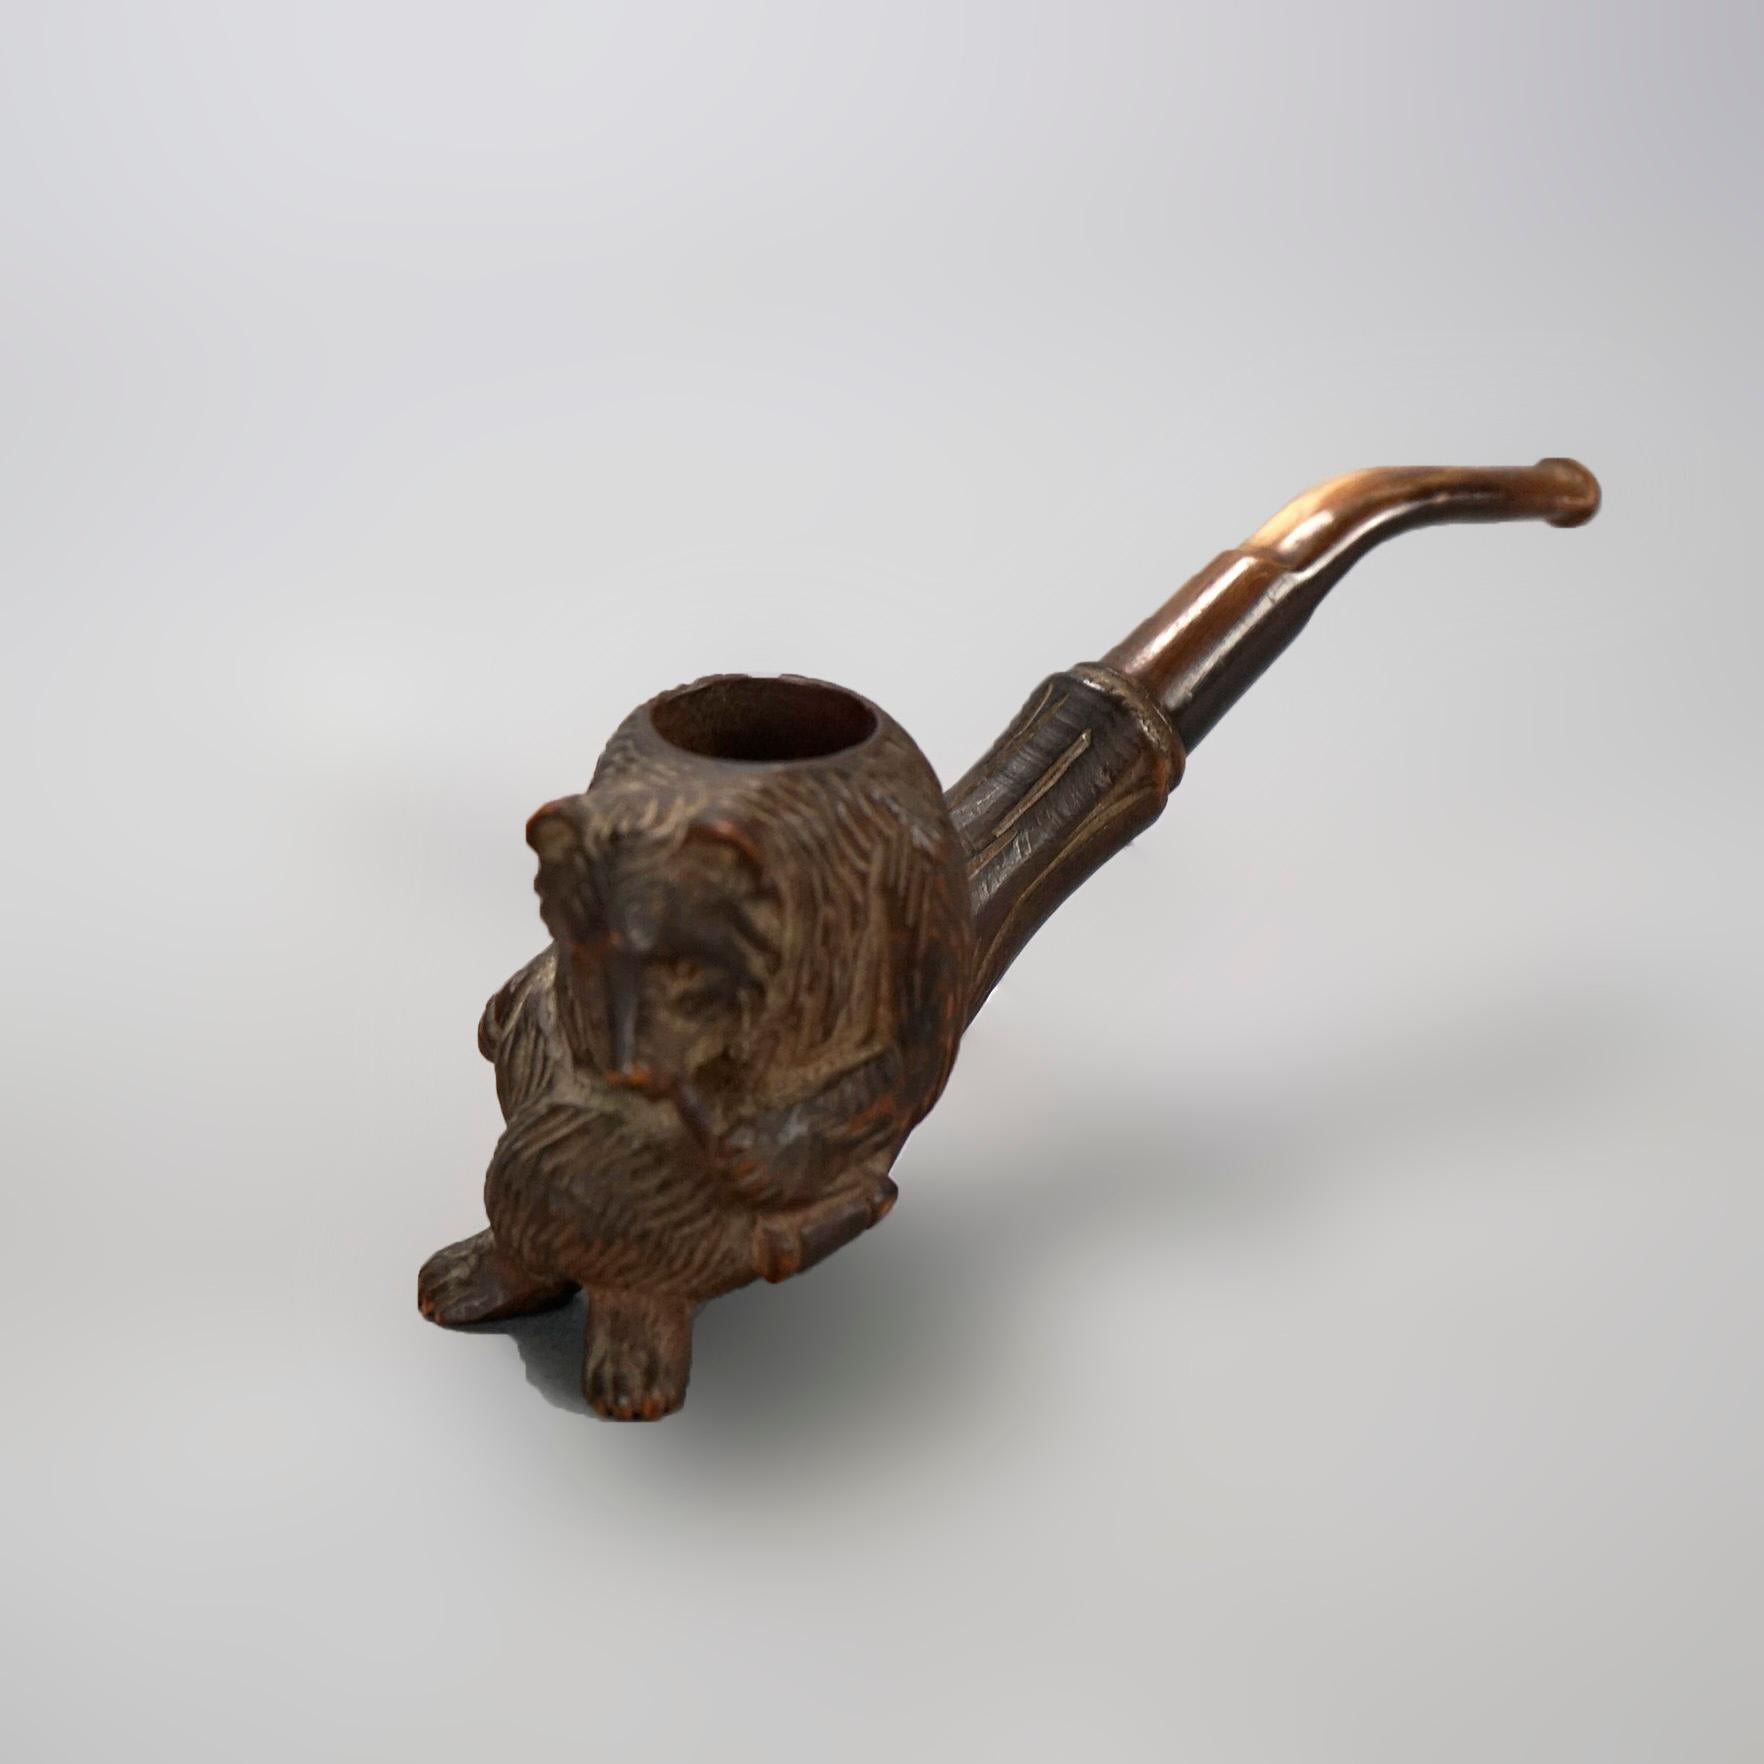 An antique German Black Forest figural tobacco pipe offers carved seated bear bowl, c1920.

Measures- 2.25''H x 1.5''W x 5.75''D.